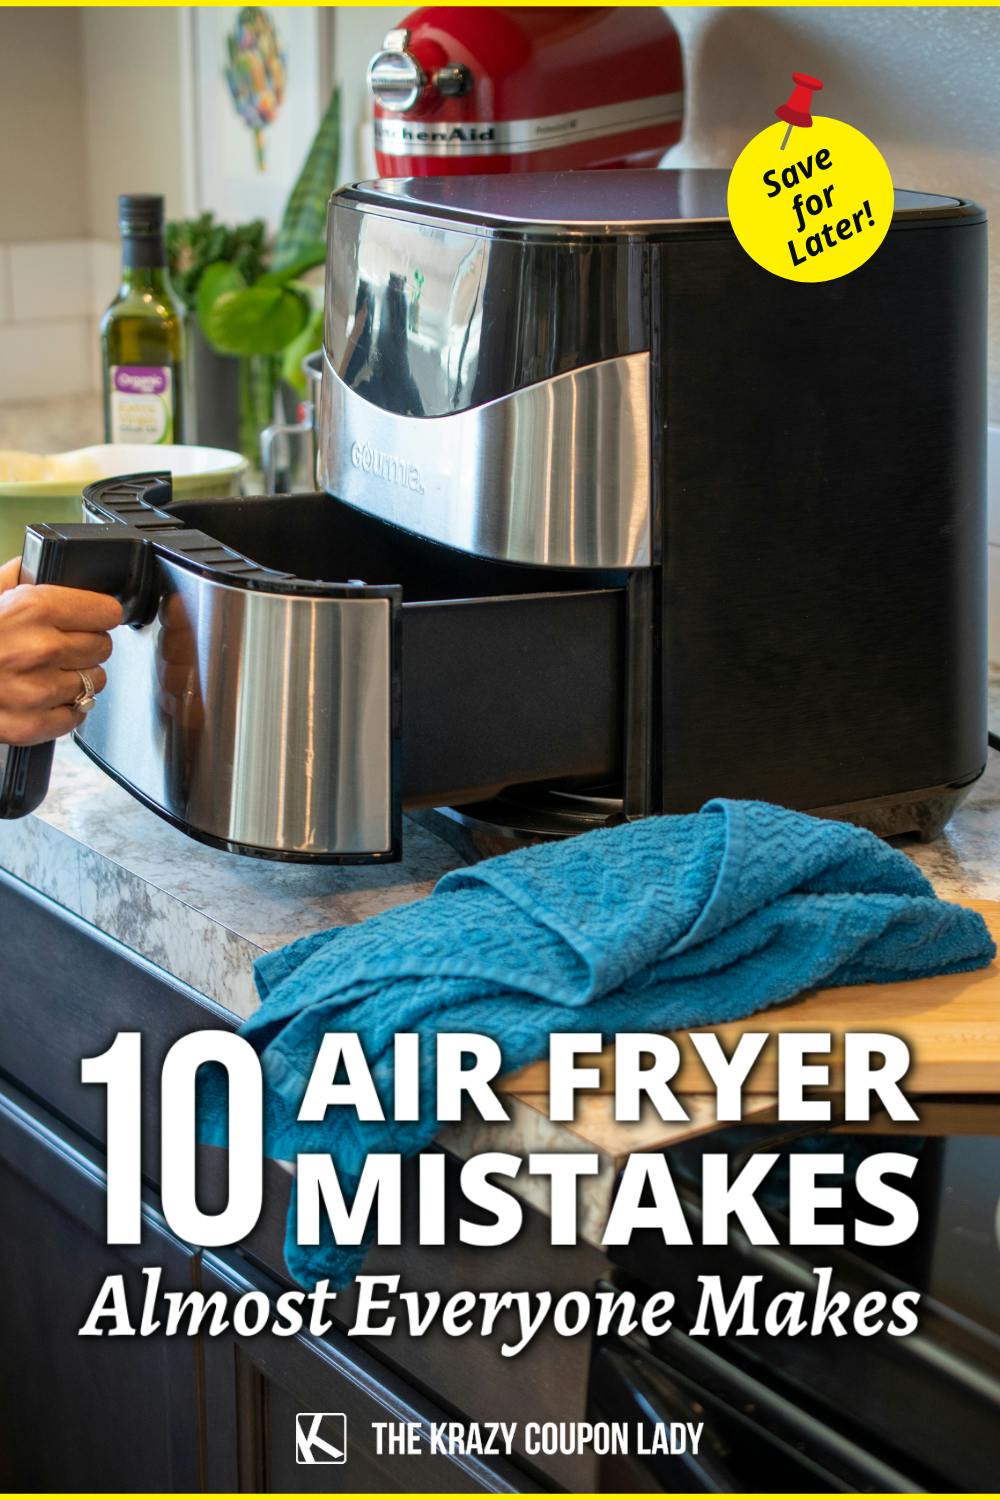 How to Use an Air Fryer: 10 Mistakes Everyone Makes